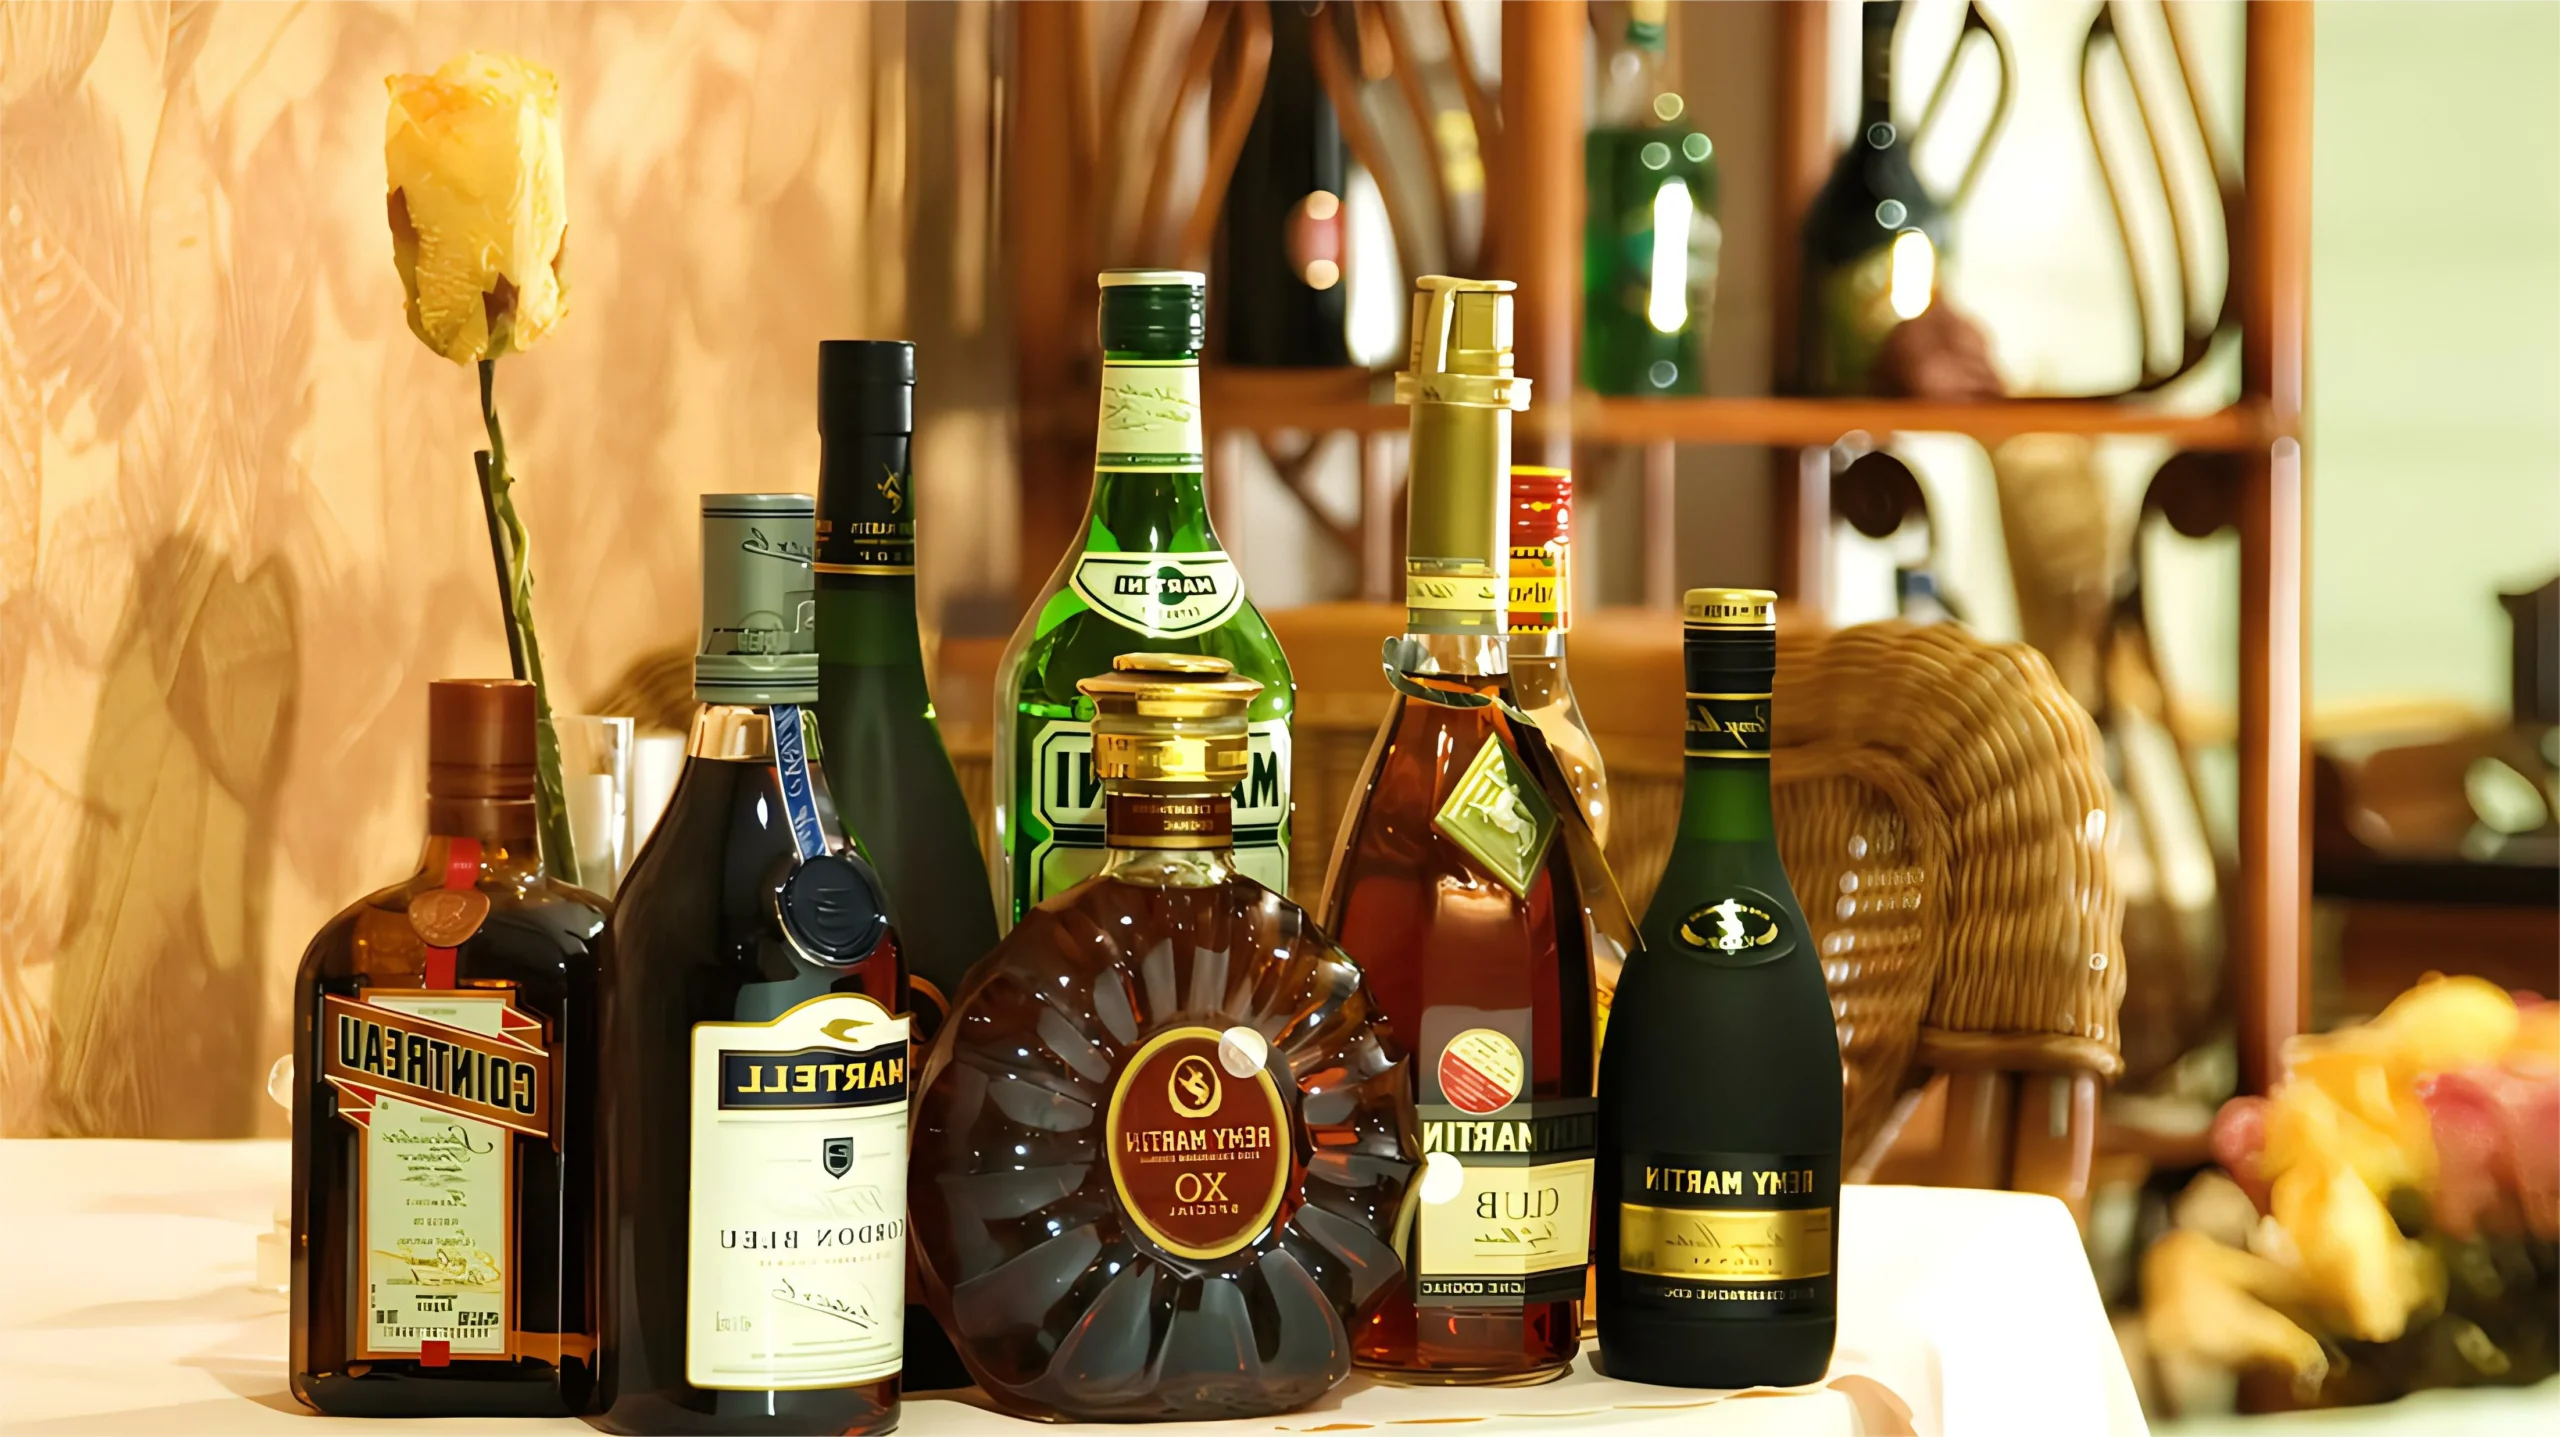 The combination of well-designed bottles and fine spirits offers a visual and tactile enjoyment.